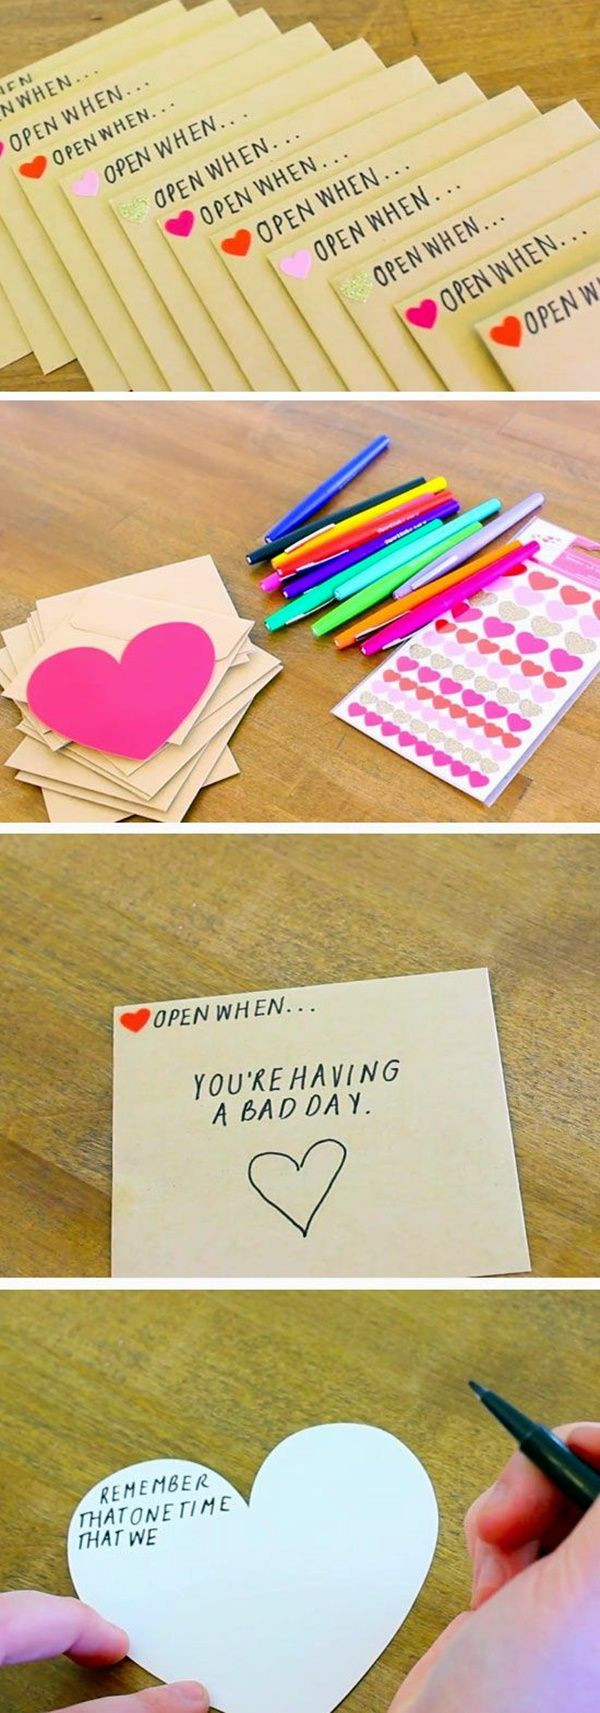 Valentine'S Day Gift Ideas For Friends
 101 Homemade Valentines Day Ideas for Him that re really